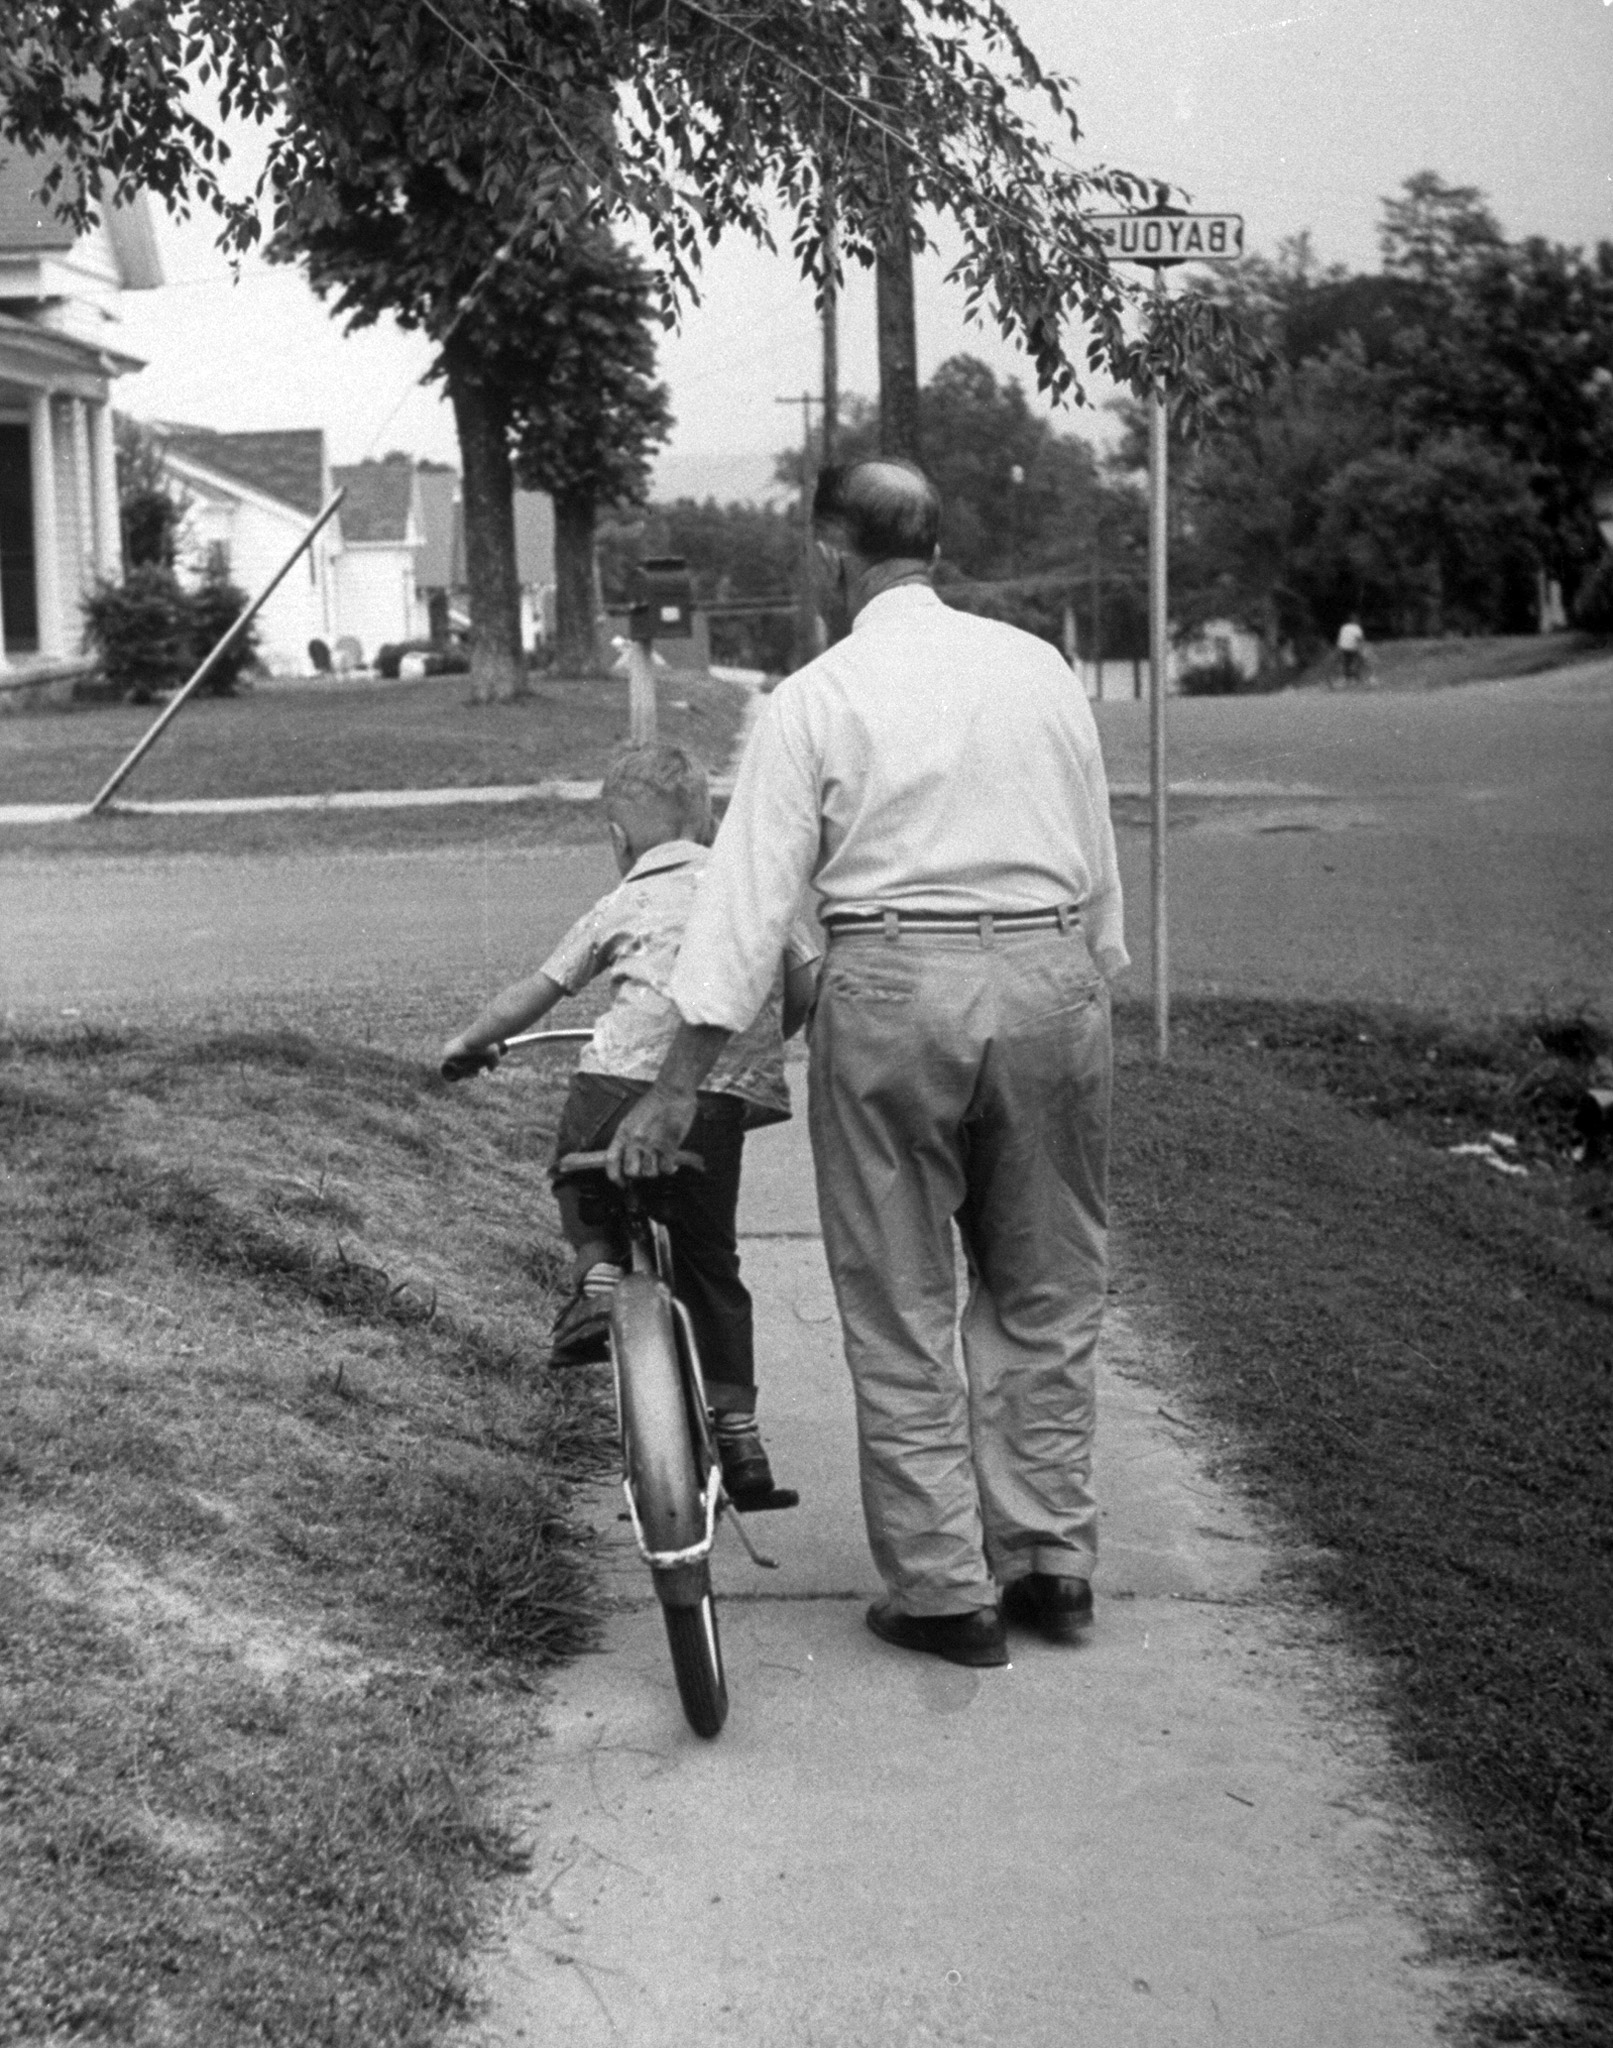 Six-year-old Billy Conner taking a wobbly first ride on a big bicycle as his grandfather William Conner gives him a steadying hand on the back of his seat, at home.